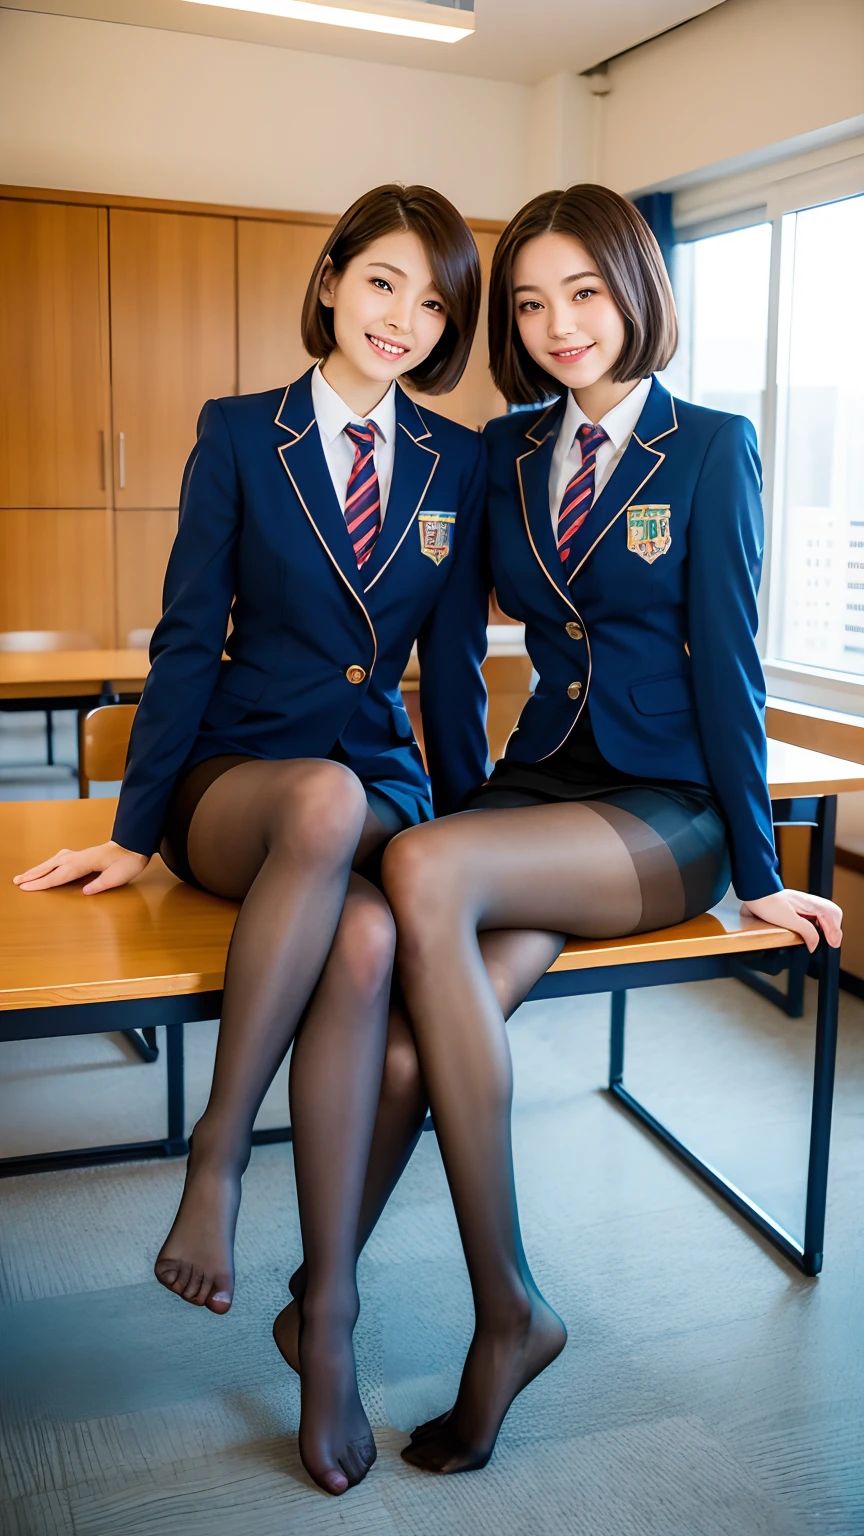 Show entire body, feet in view, four 16y.o., gorgeous Caucasian females, short brunette hair, perfect bodies, 8k resolution, wearing American school uniforms, brown sheer pantyhose, no shoes, aerial view, posing inside luxurious classroom, smiling, afternoon,